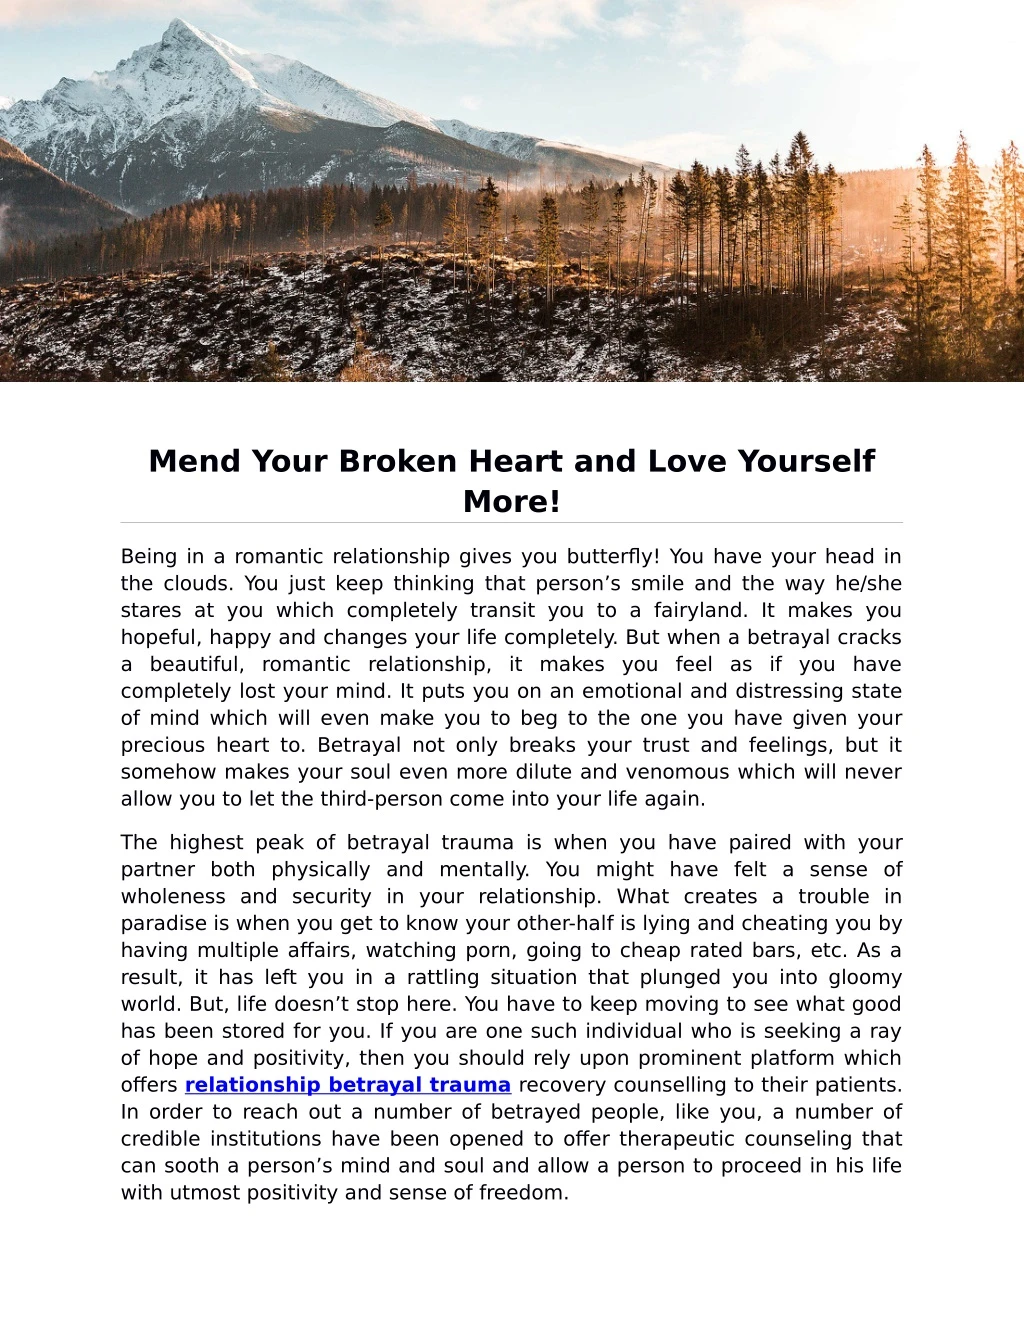 mend your broken heart and love yourself more